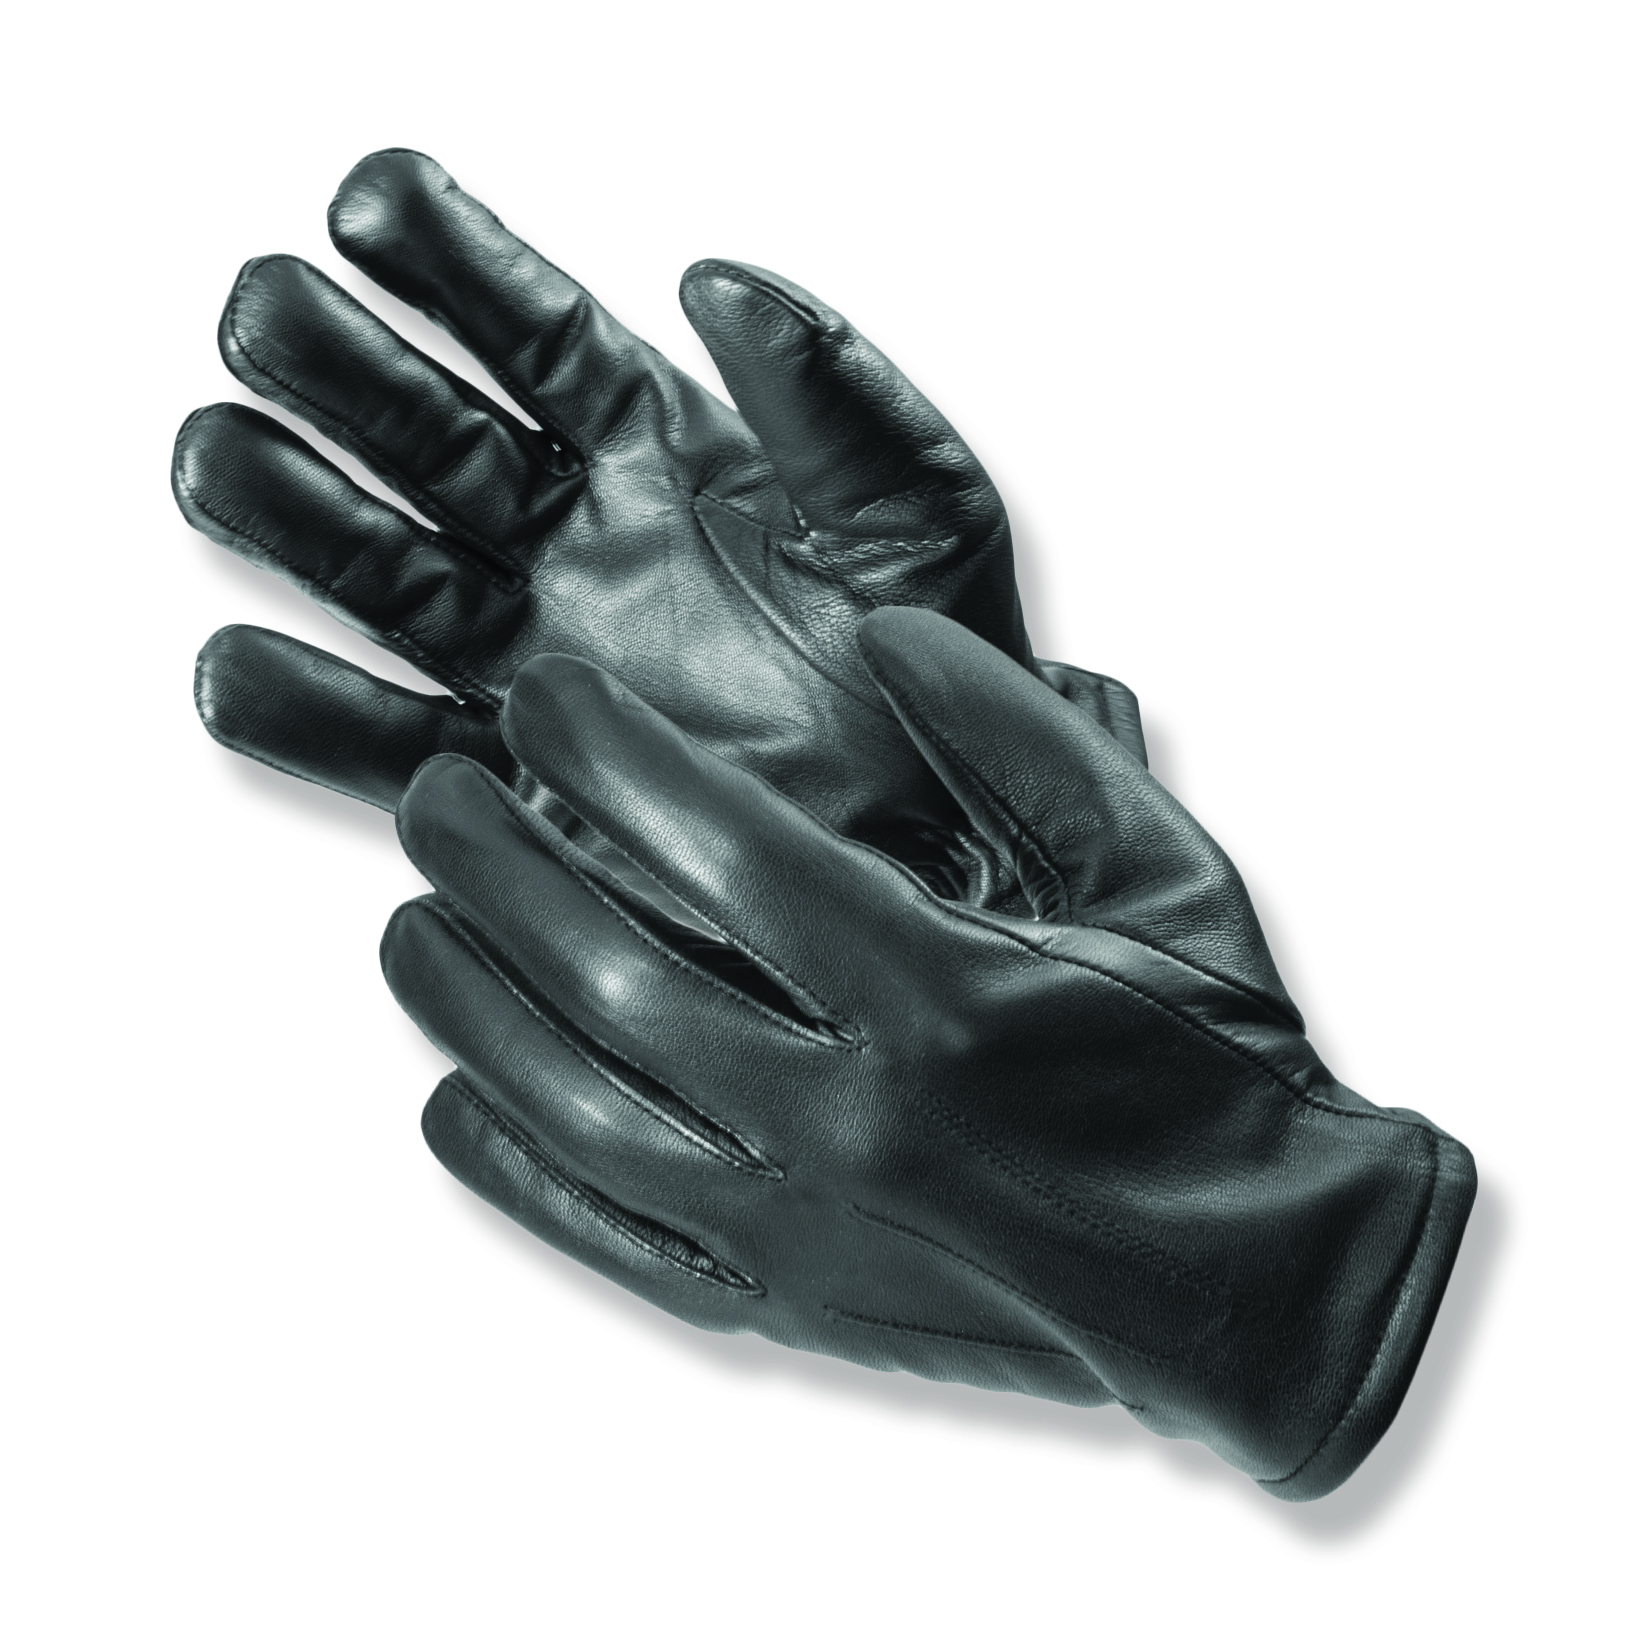 100% top quality leather Captain™ Winter Uniform Gloves are lined with 40 gram Thinsulate